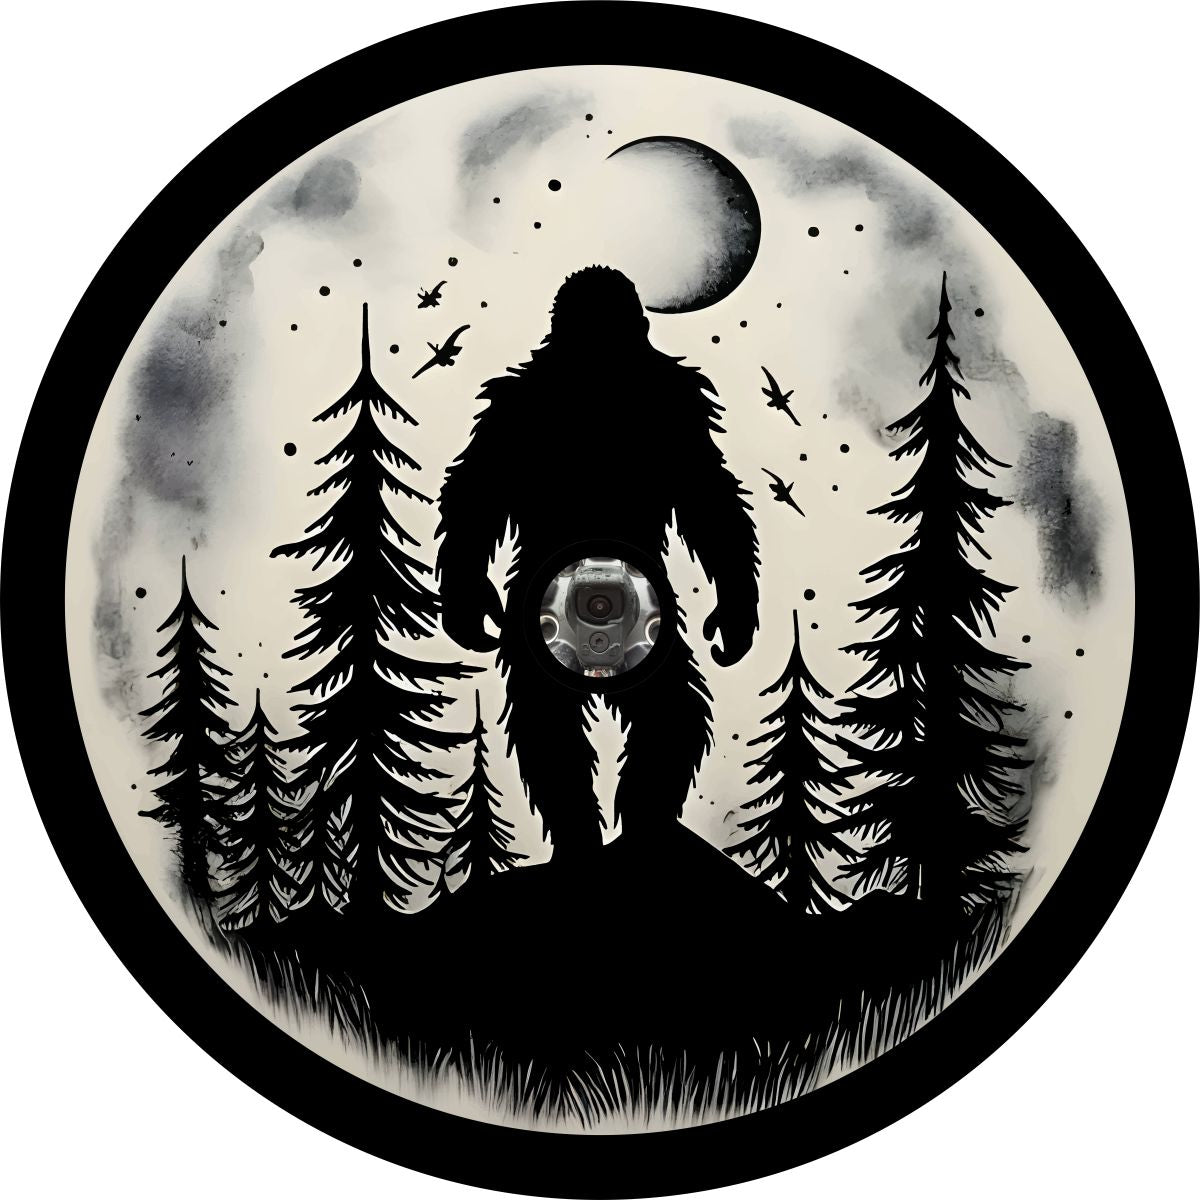 Create sasquatch spare tire cover design with a silhouette of bigfoot walking through the forest under the full moon with a hole placement for a backup camera